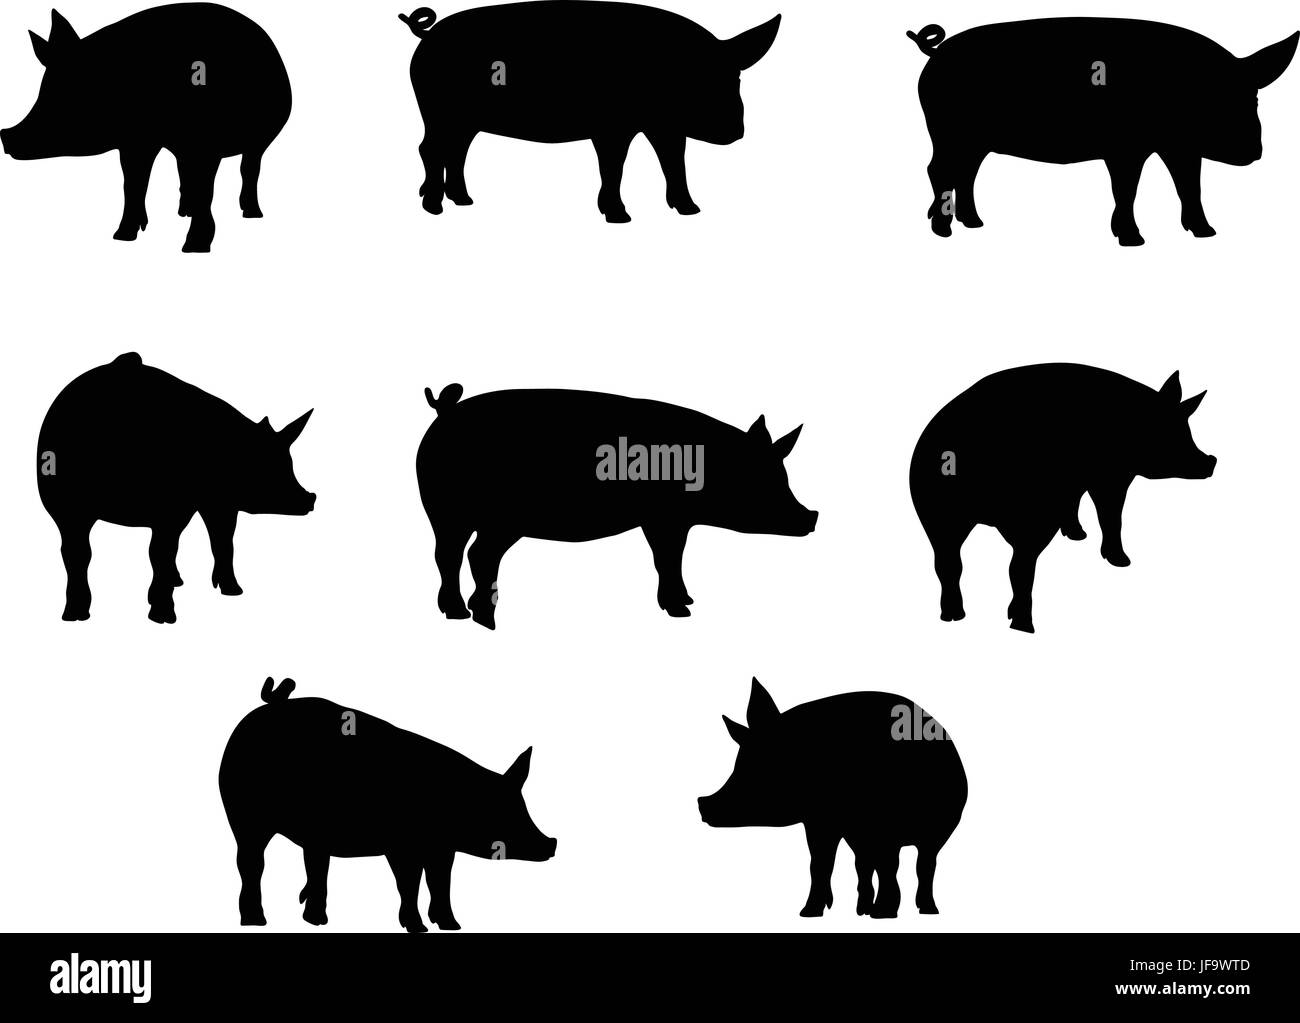 pig silhouette Stock Vector